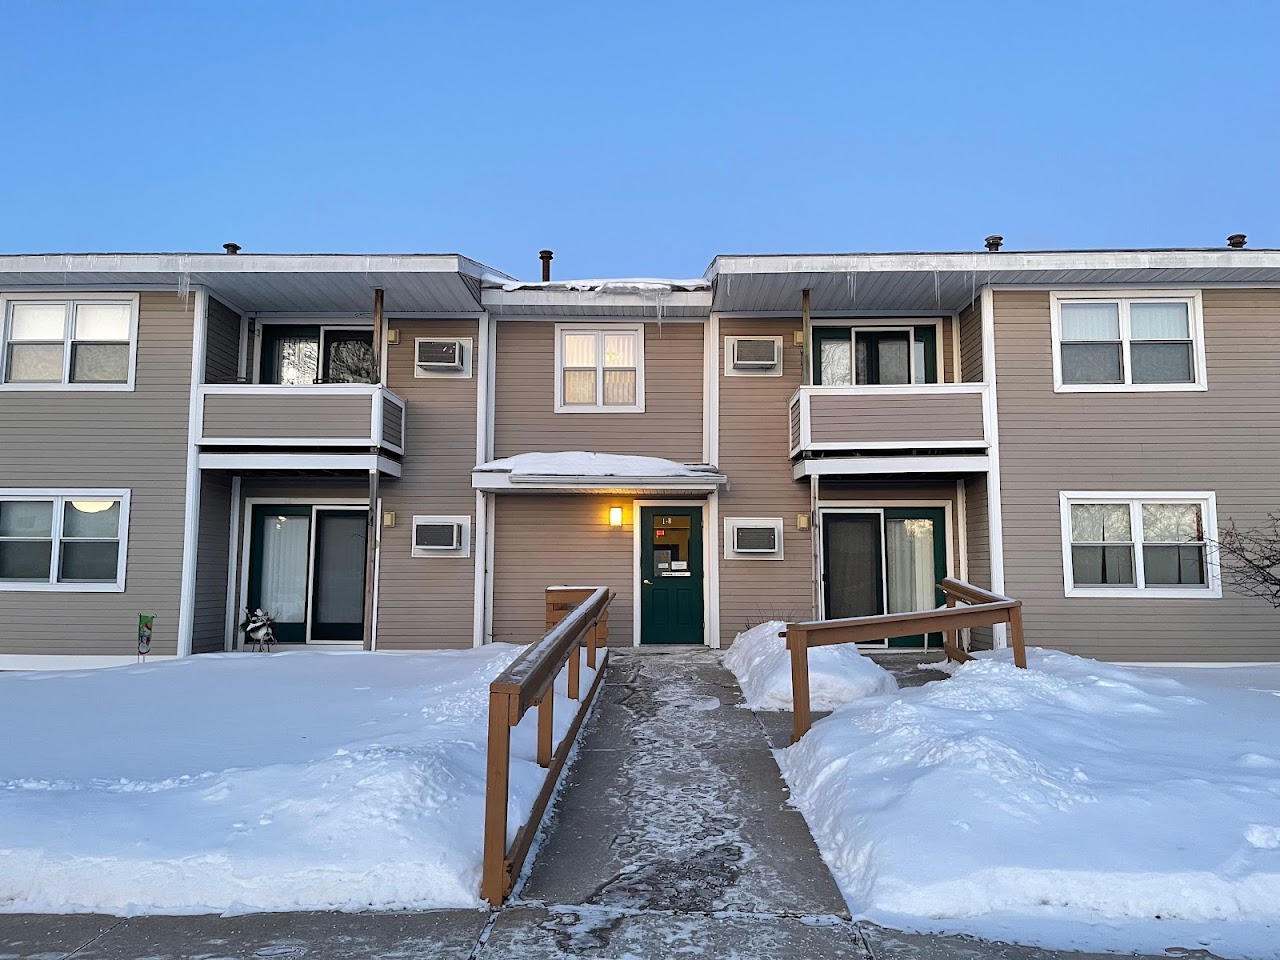 Photo of NORWOOD APTS. Affordable housing located at 1025 NORWAY ST NORWAY, MI 49870